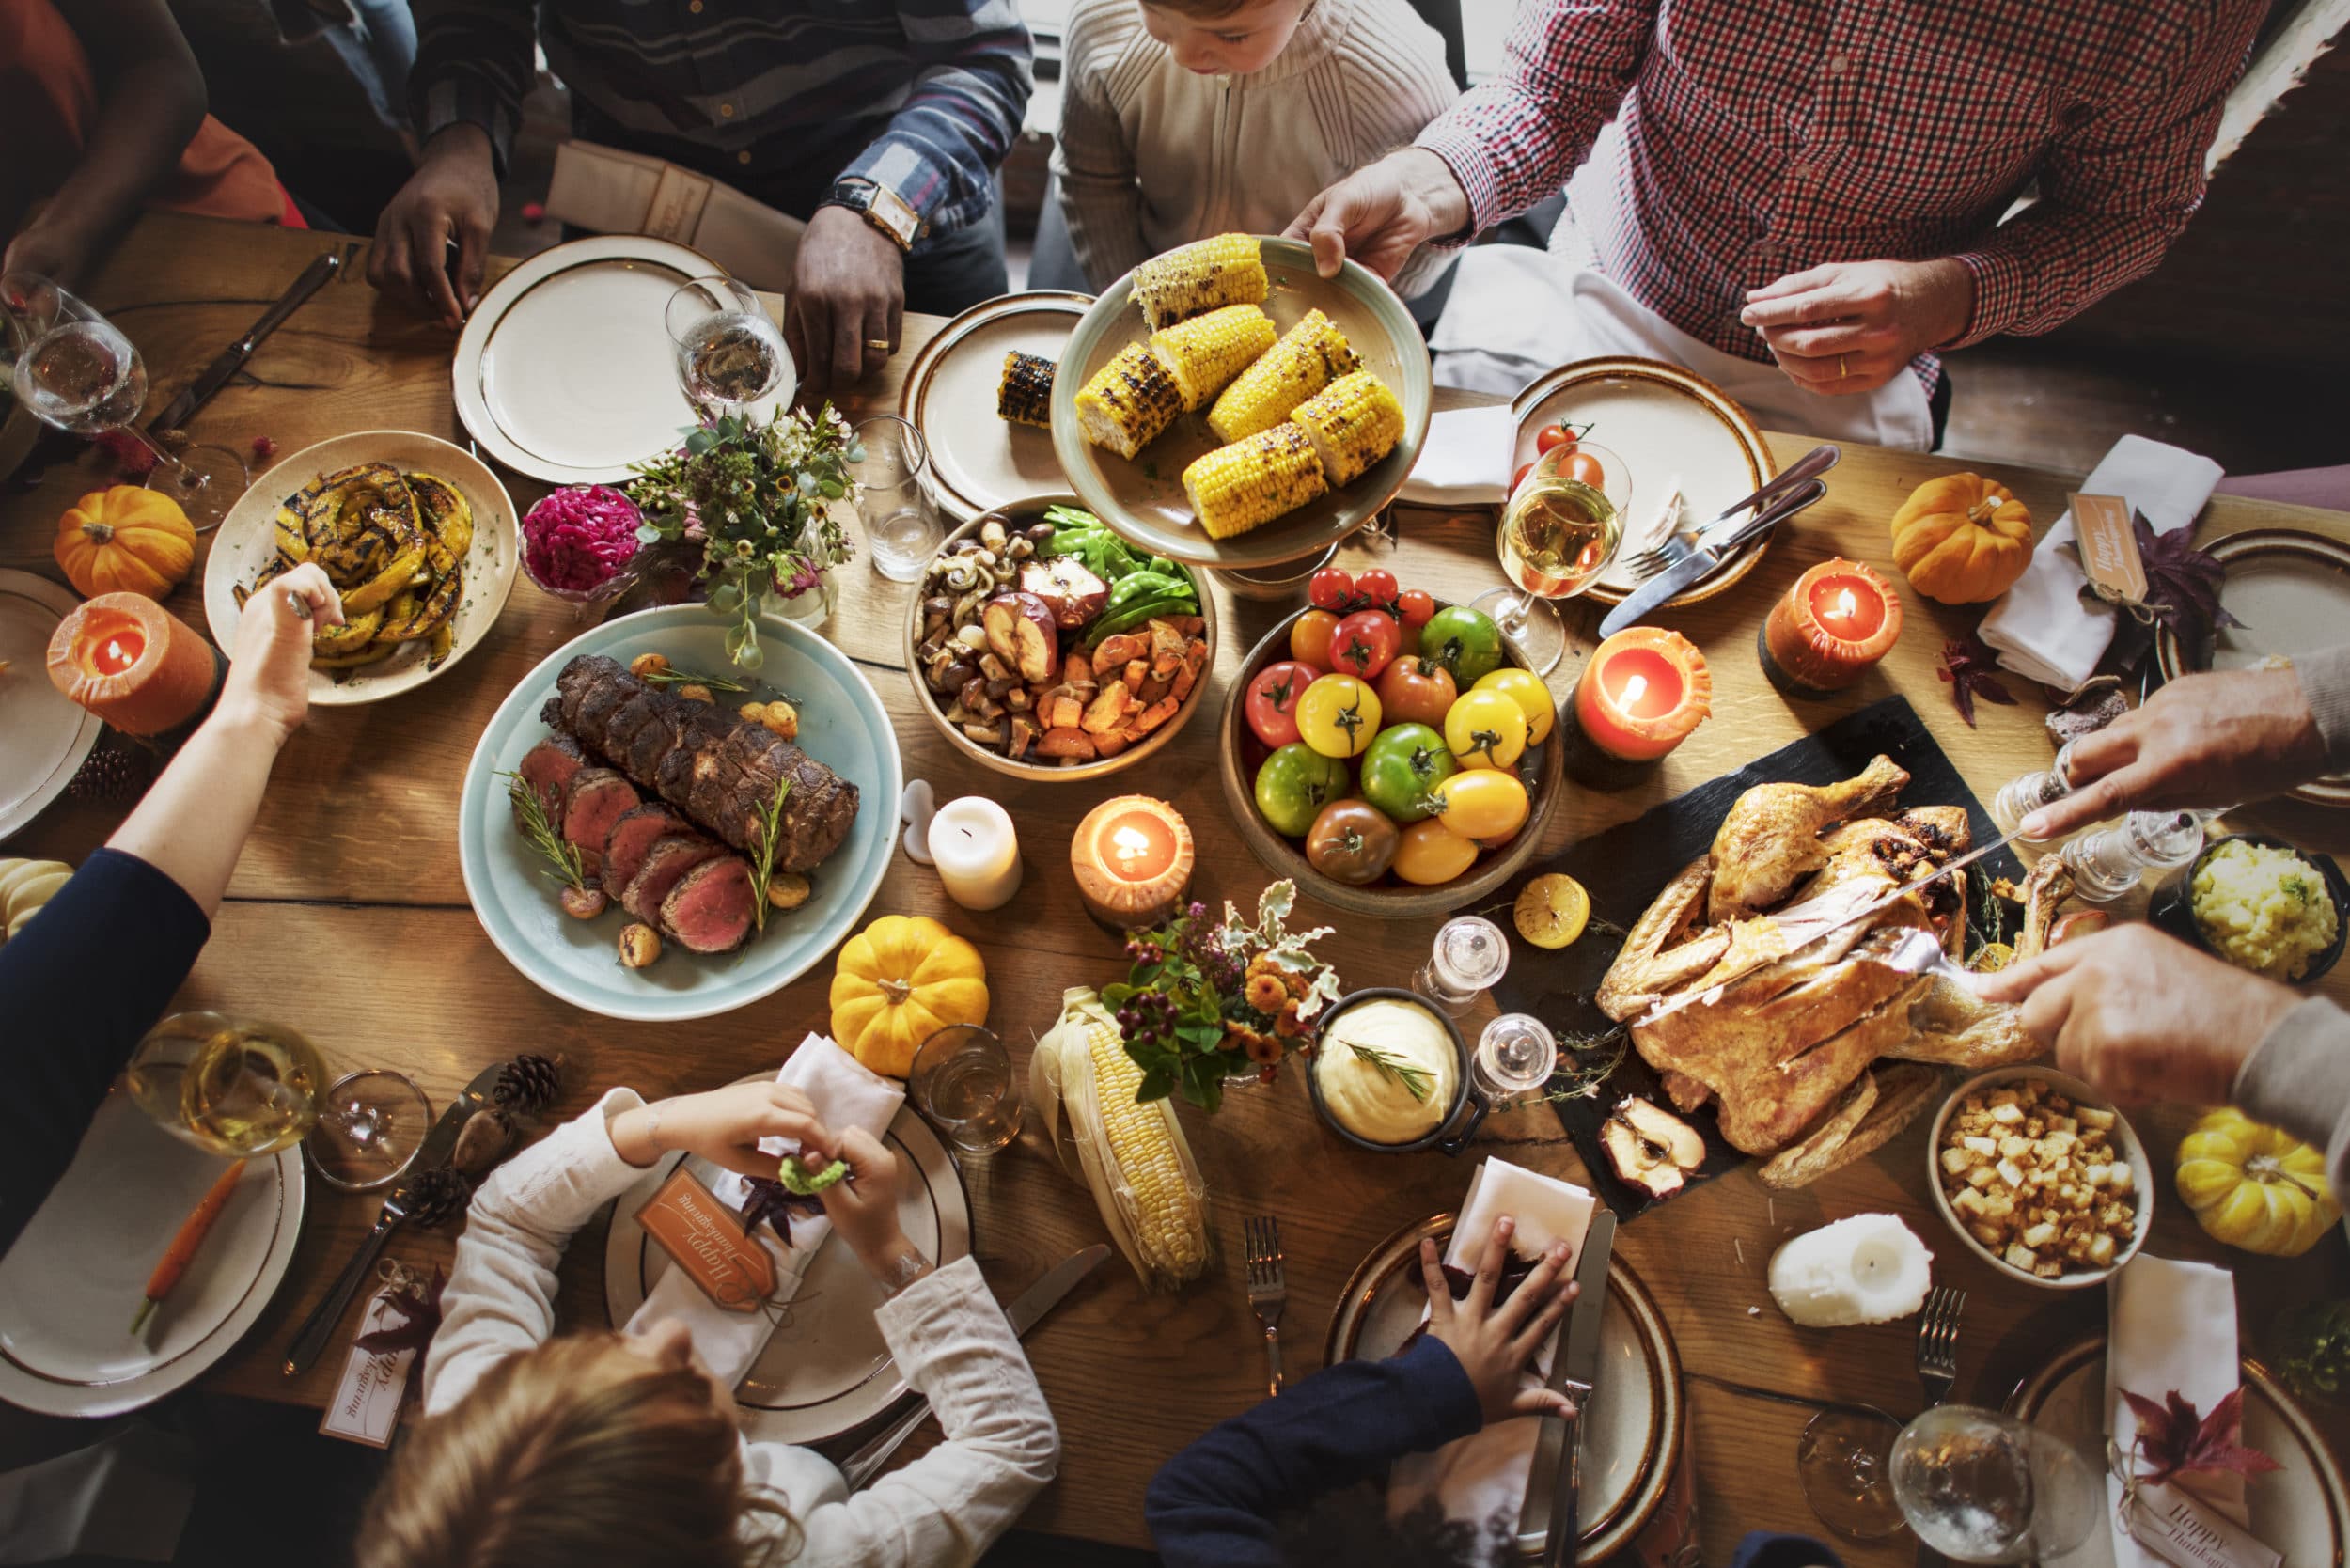 An aerial view of a family's full Thanksgiving table with people reaching in to serve themselves